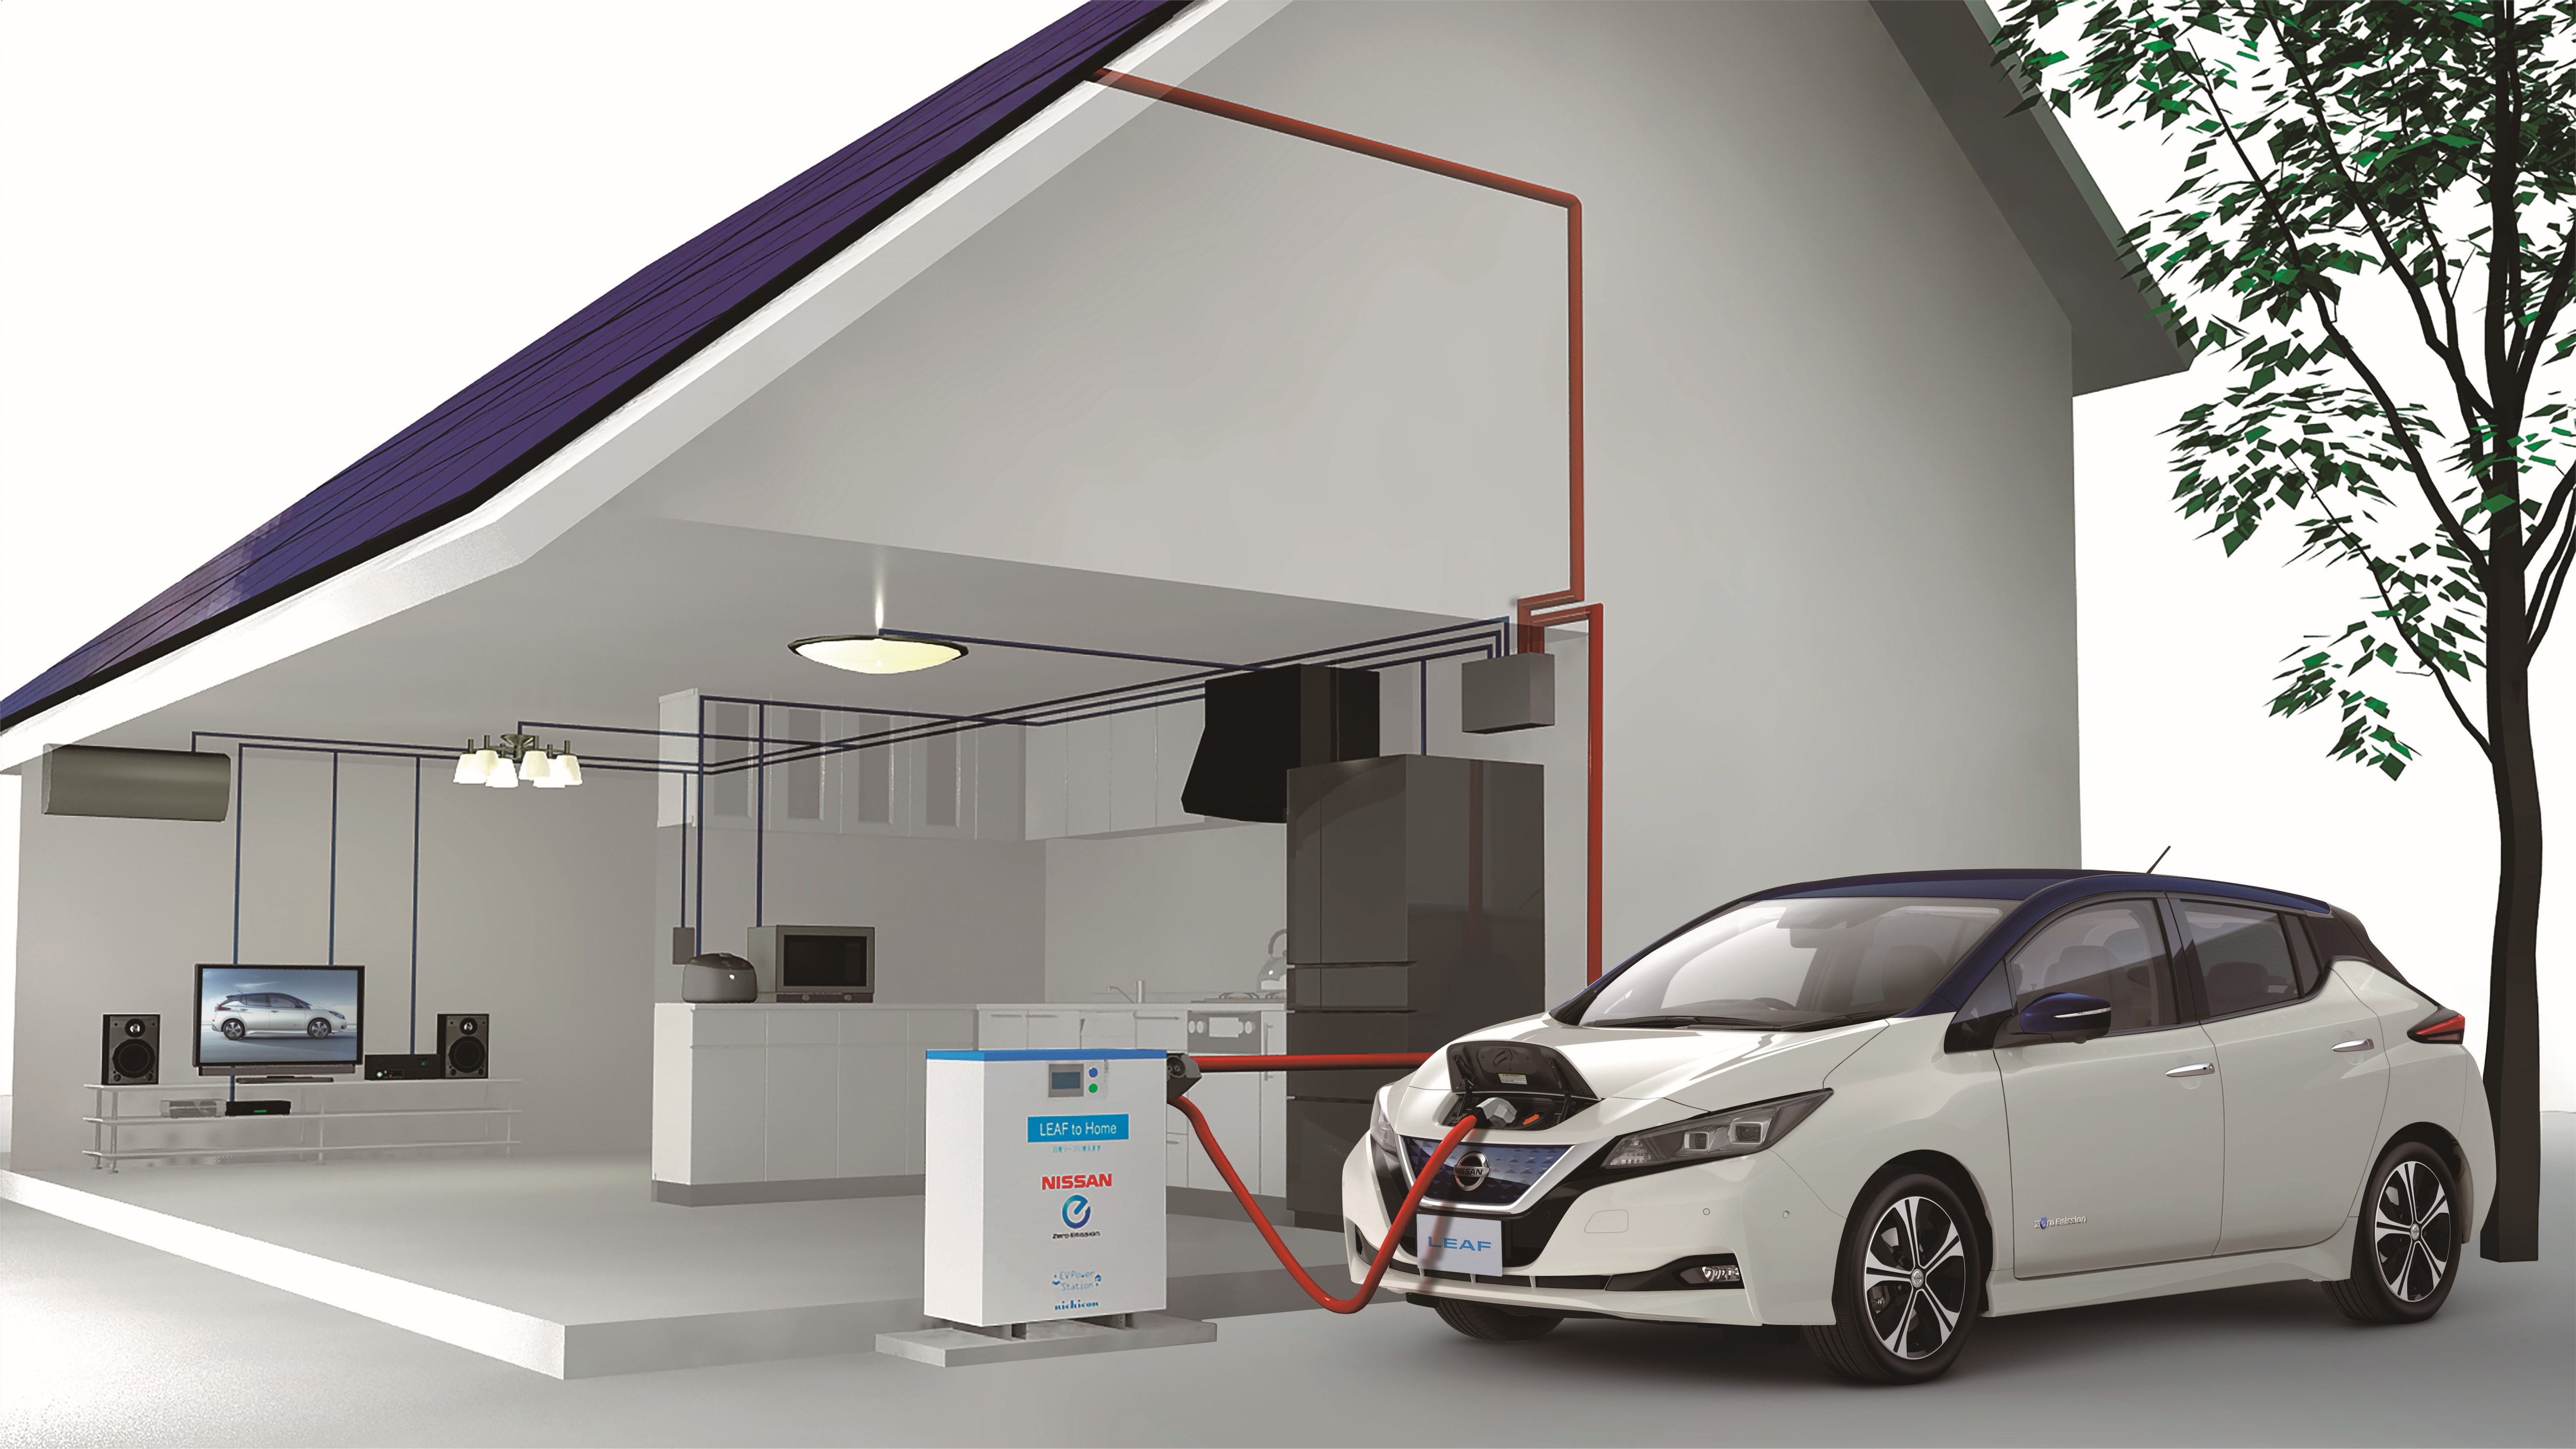 Nissan unveils new EV ecosystem to offer free power to owners with